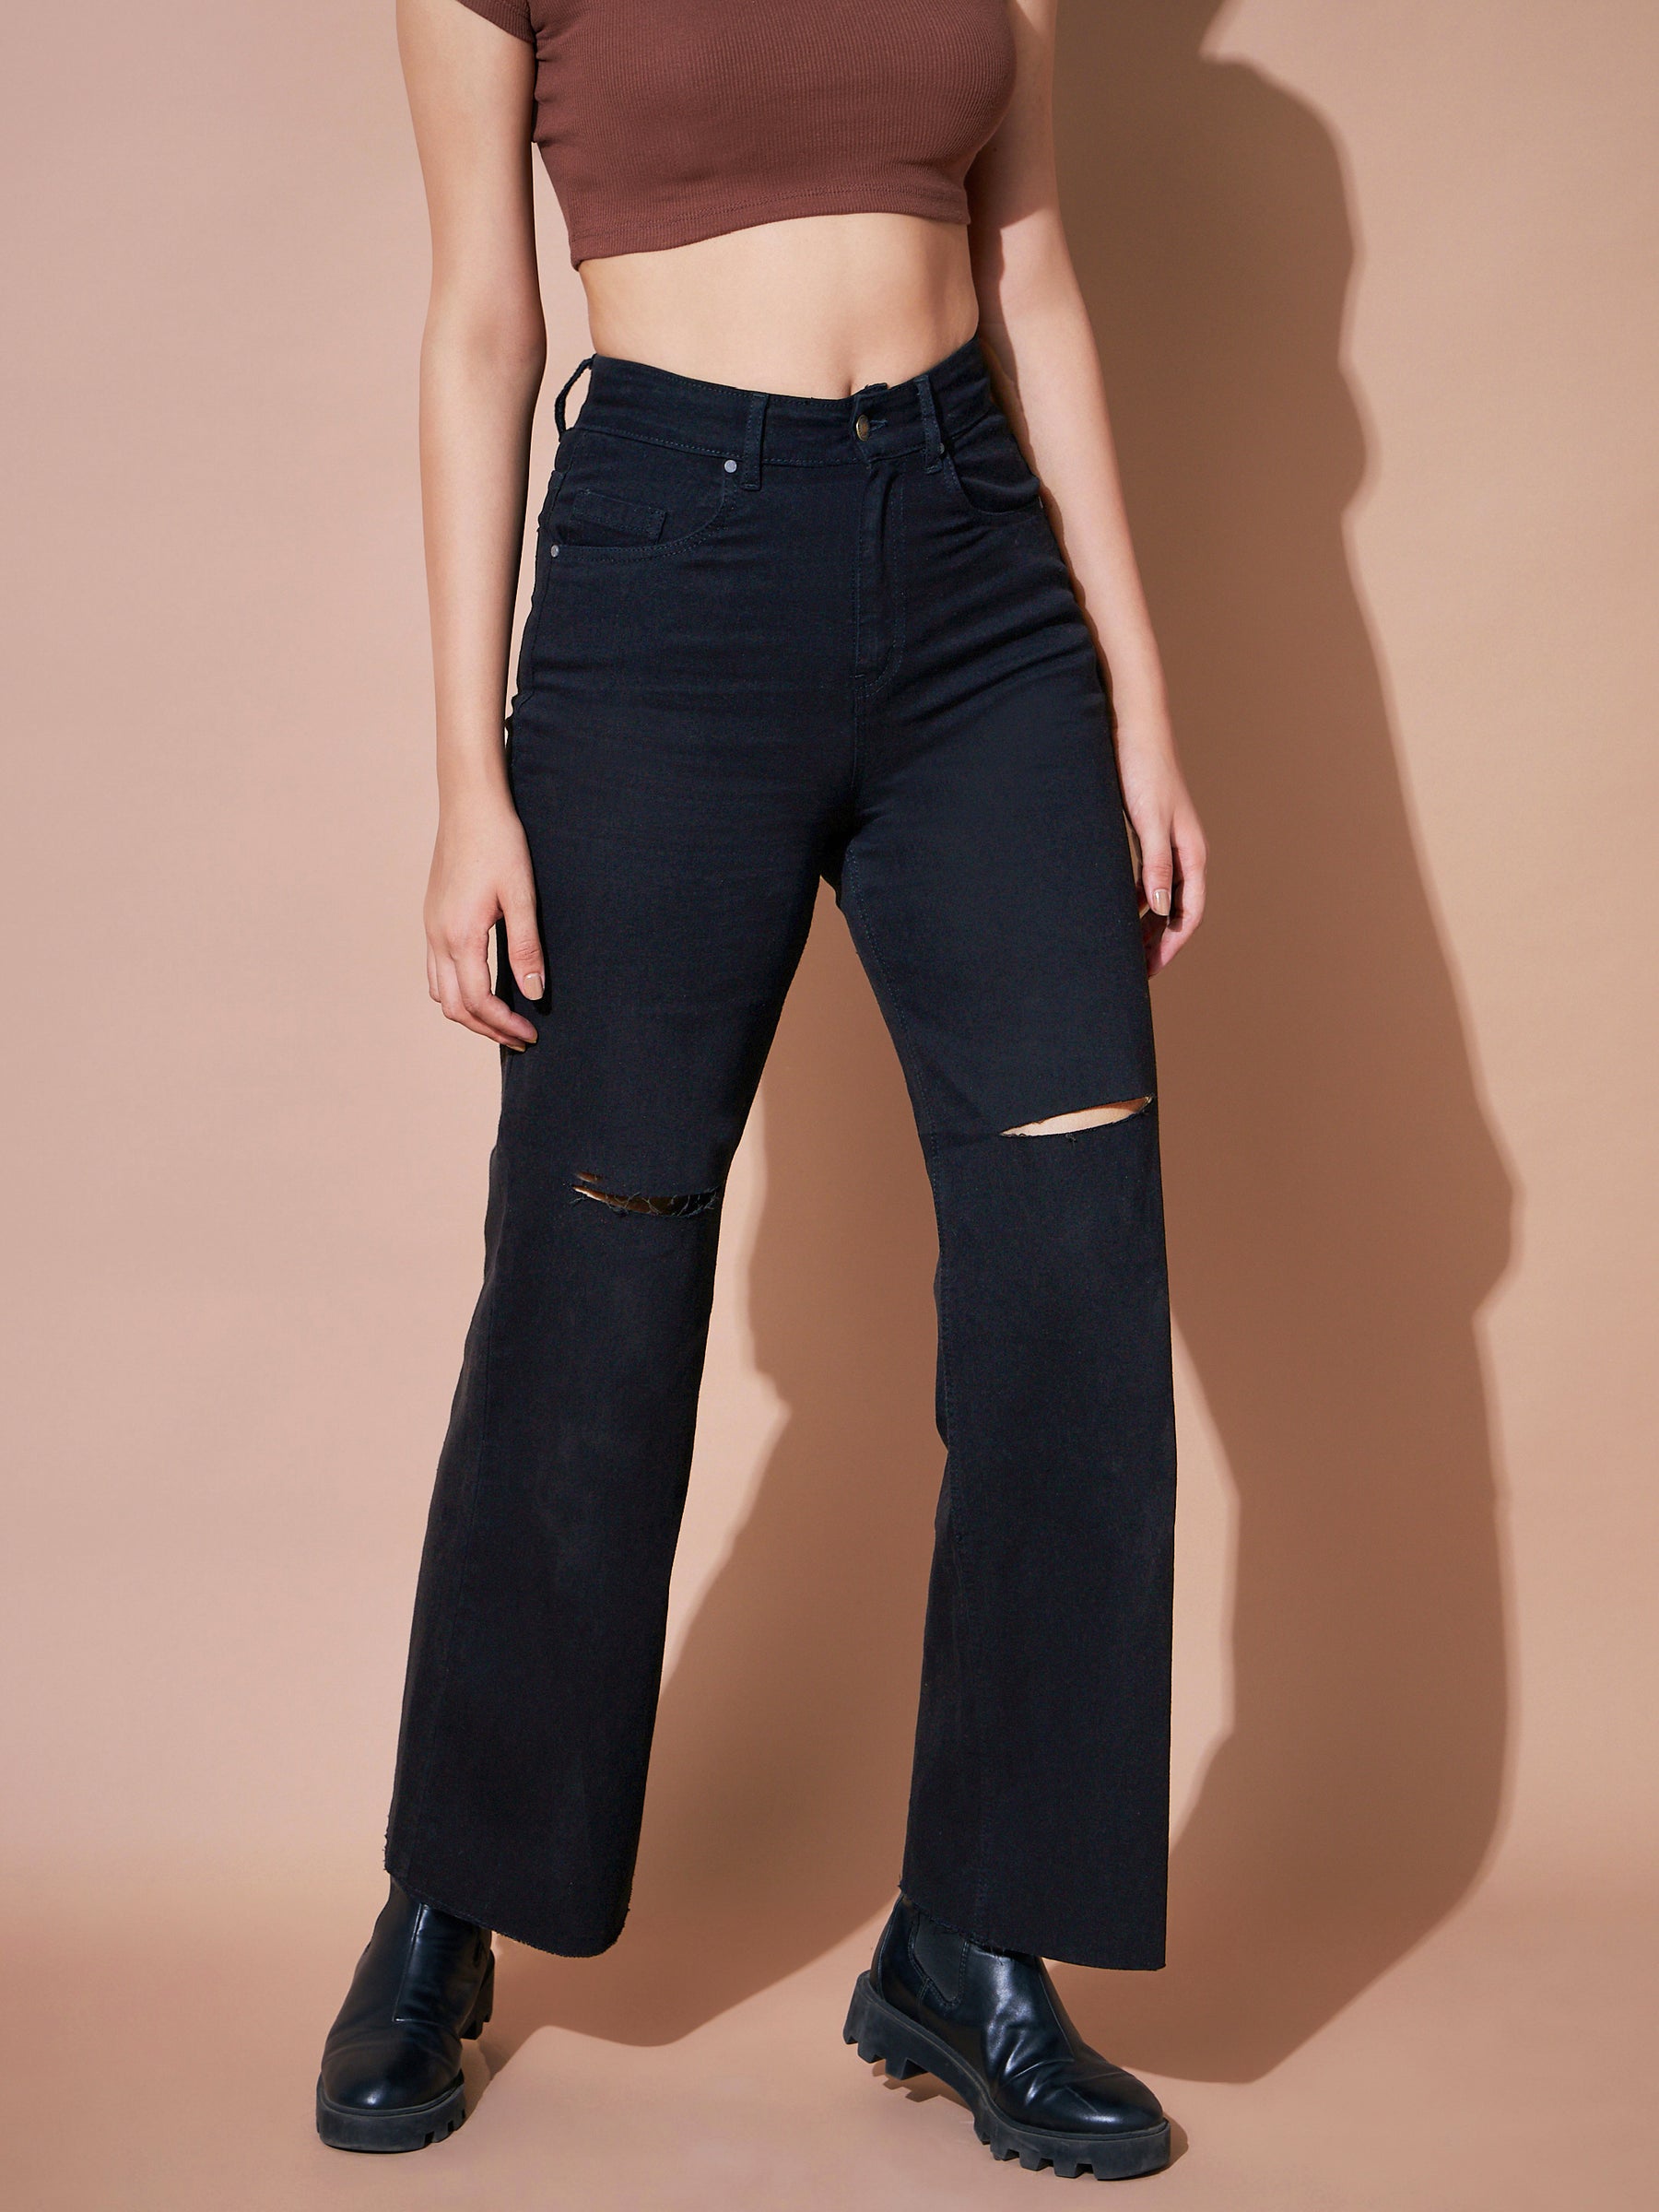 BOSS - High-waisted cropped jeans in black power-stretch denim